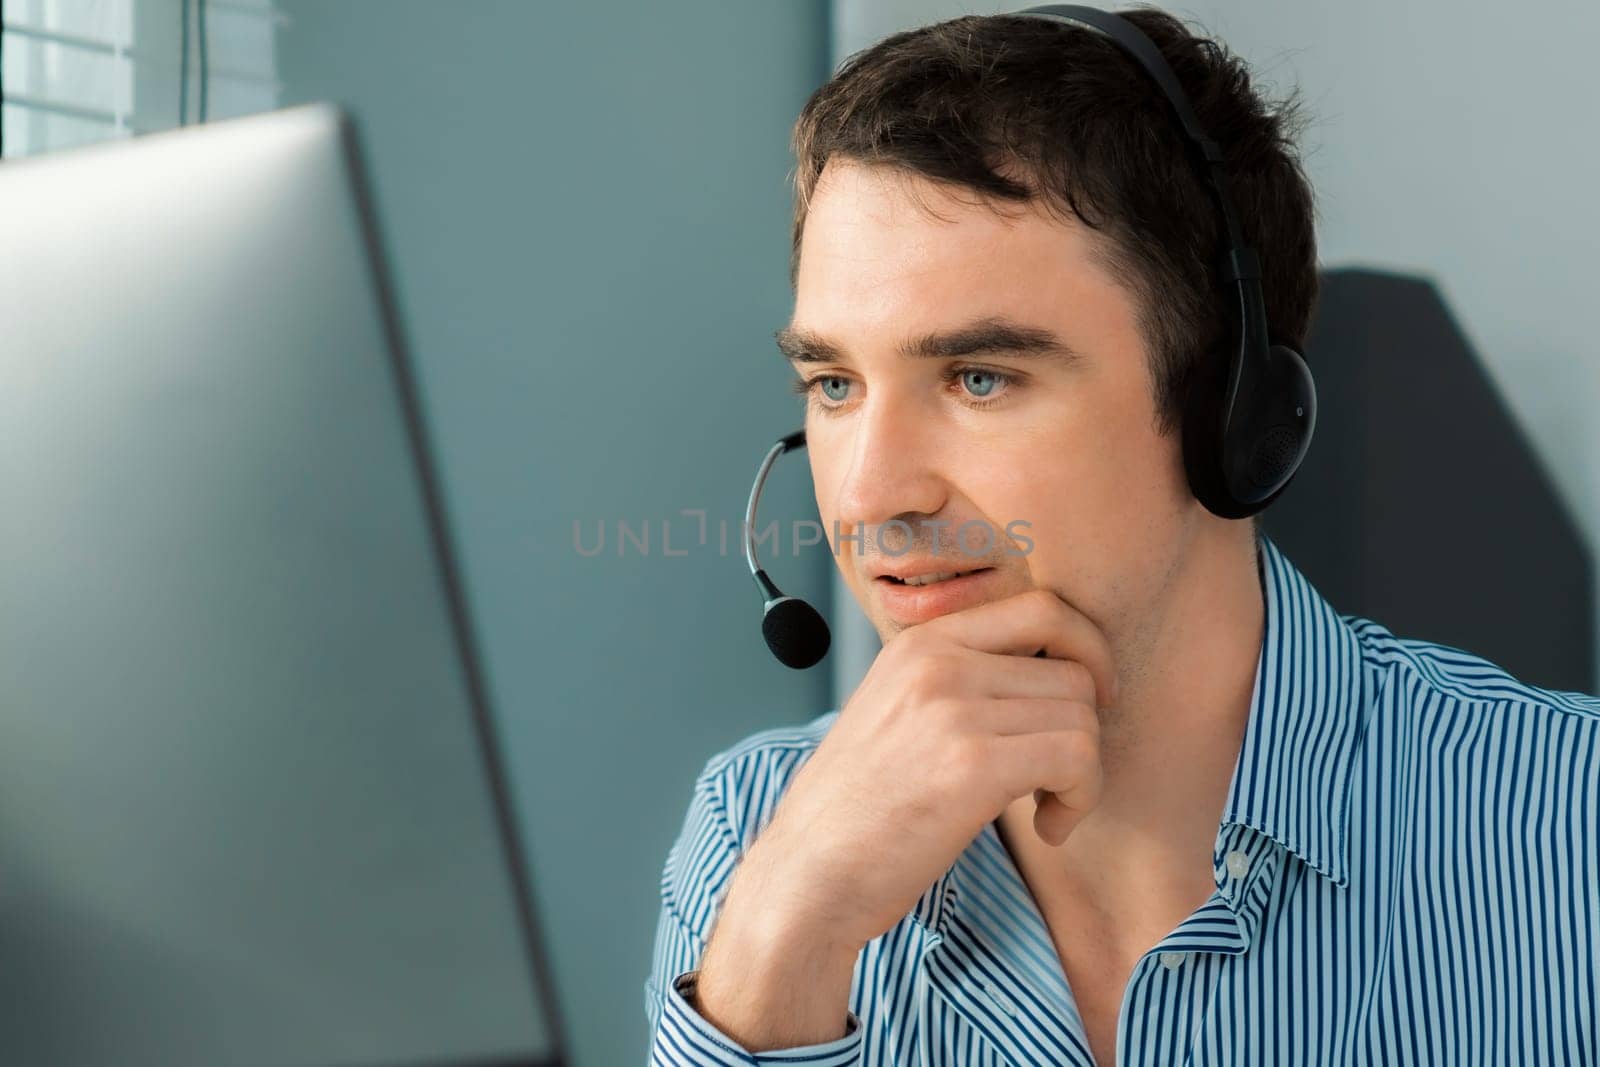 Competent male operator working with customers in the office. Concept of an operator, customer service agent working in the office.